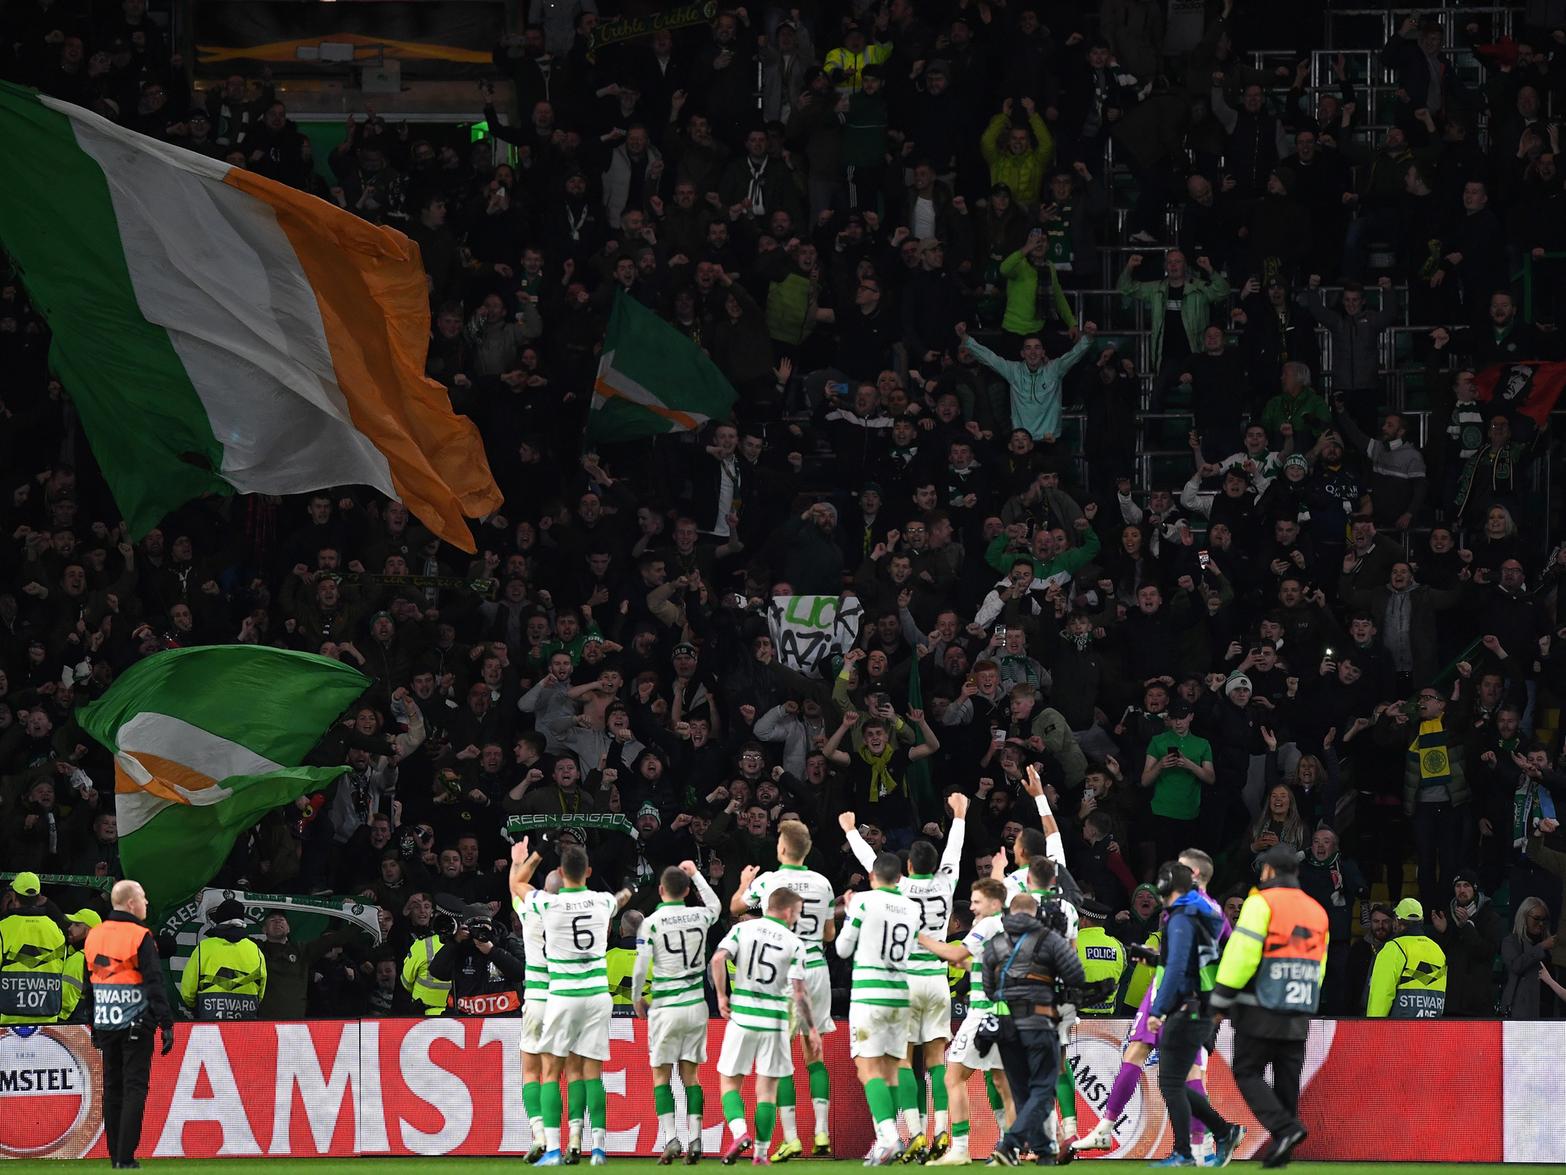 Celtic fans salute their team at full time after a famous win in Europe